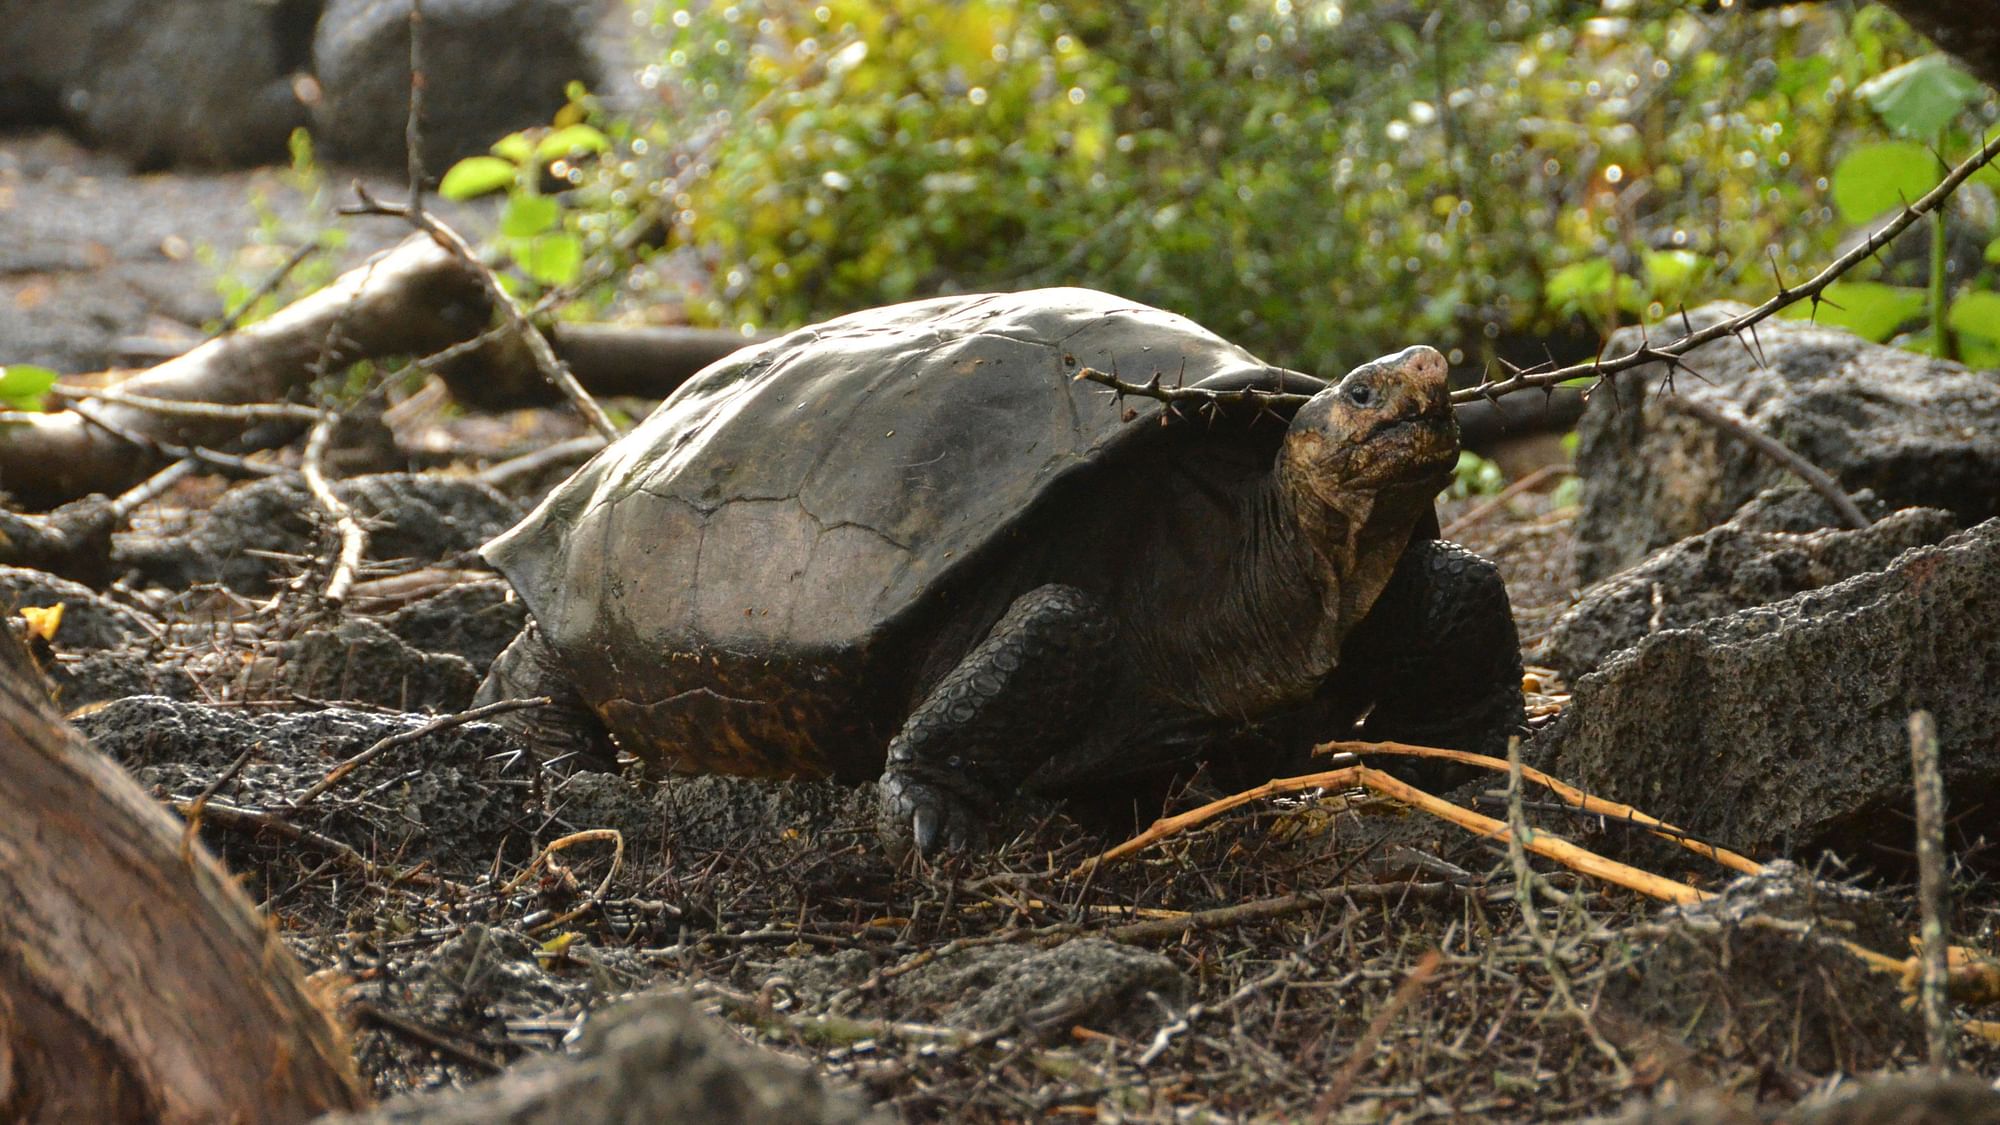 This photo released by the Galapagos National Park shows a Chelonoidis phantasticus tortoise at the Galapagos National Park in Santa Cruz Island